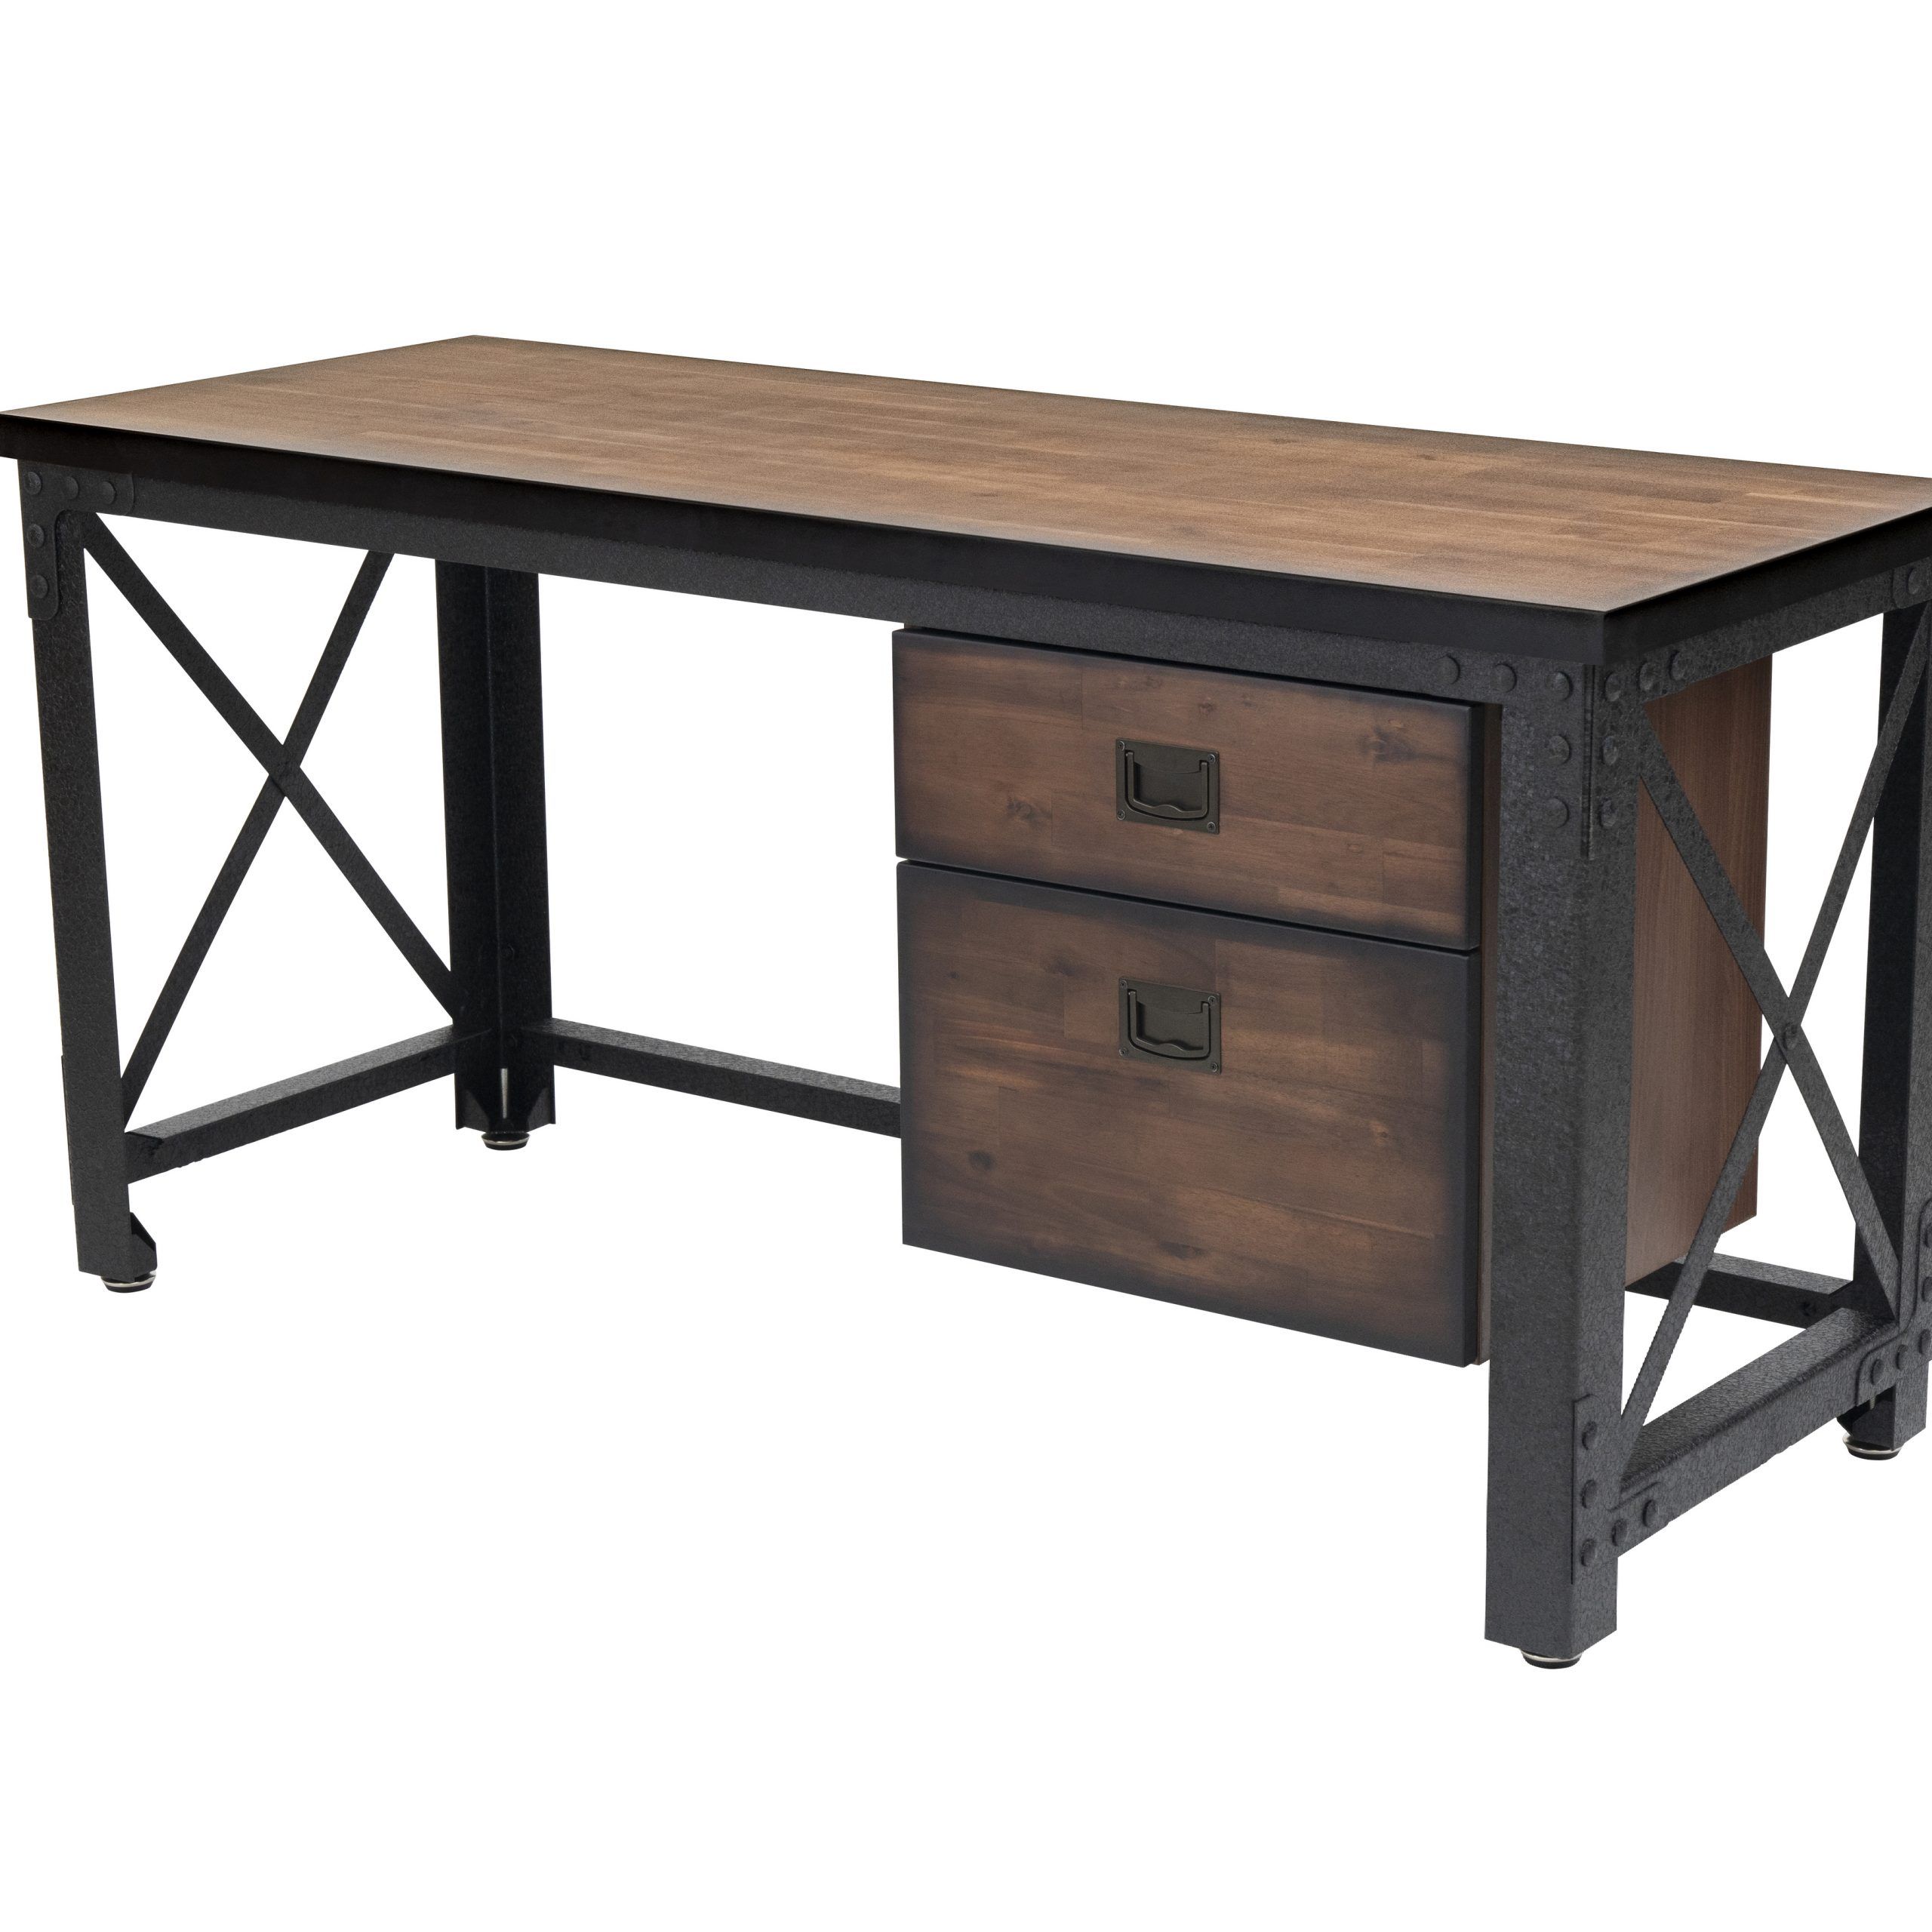 Black Wood And Metal Office Desks Pertaining To Most Recent Jackson 62″ Industrial Metal & Wood Desk With Drawers – Duramax (View 13 of 15)